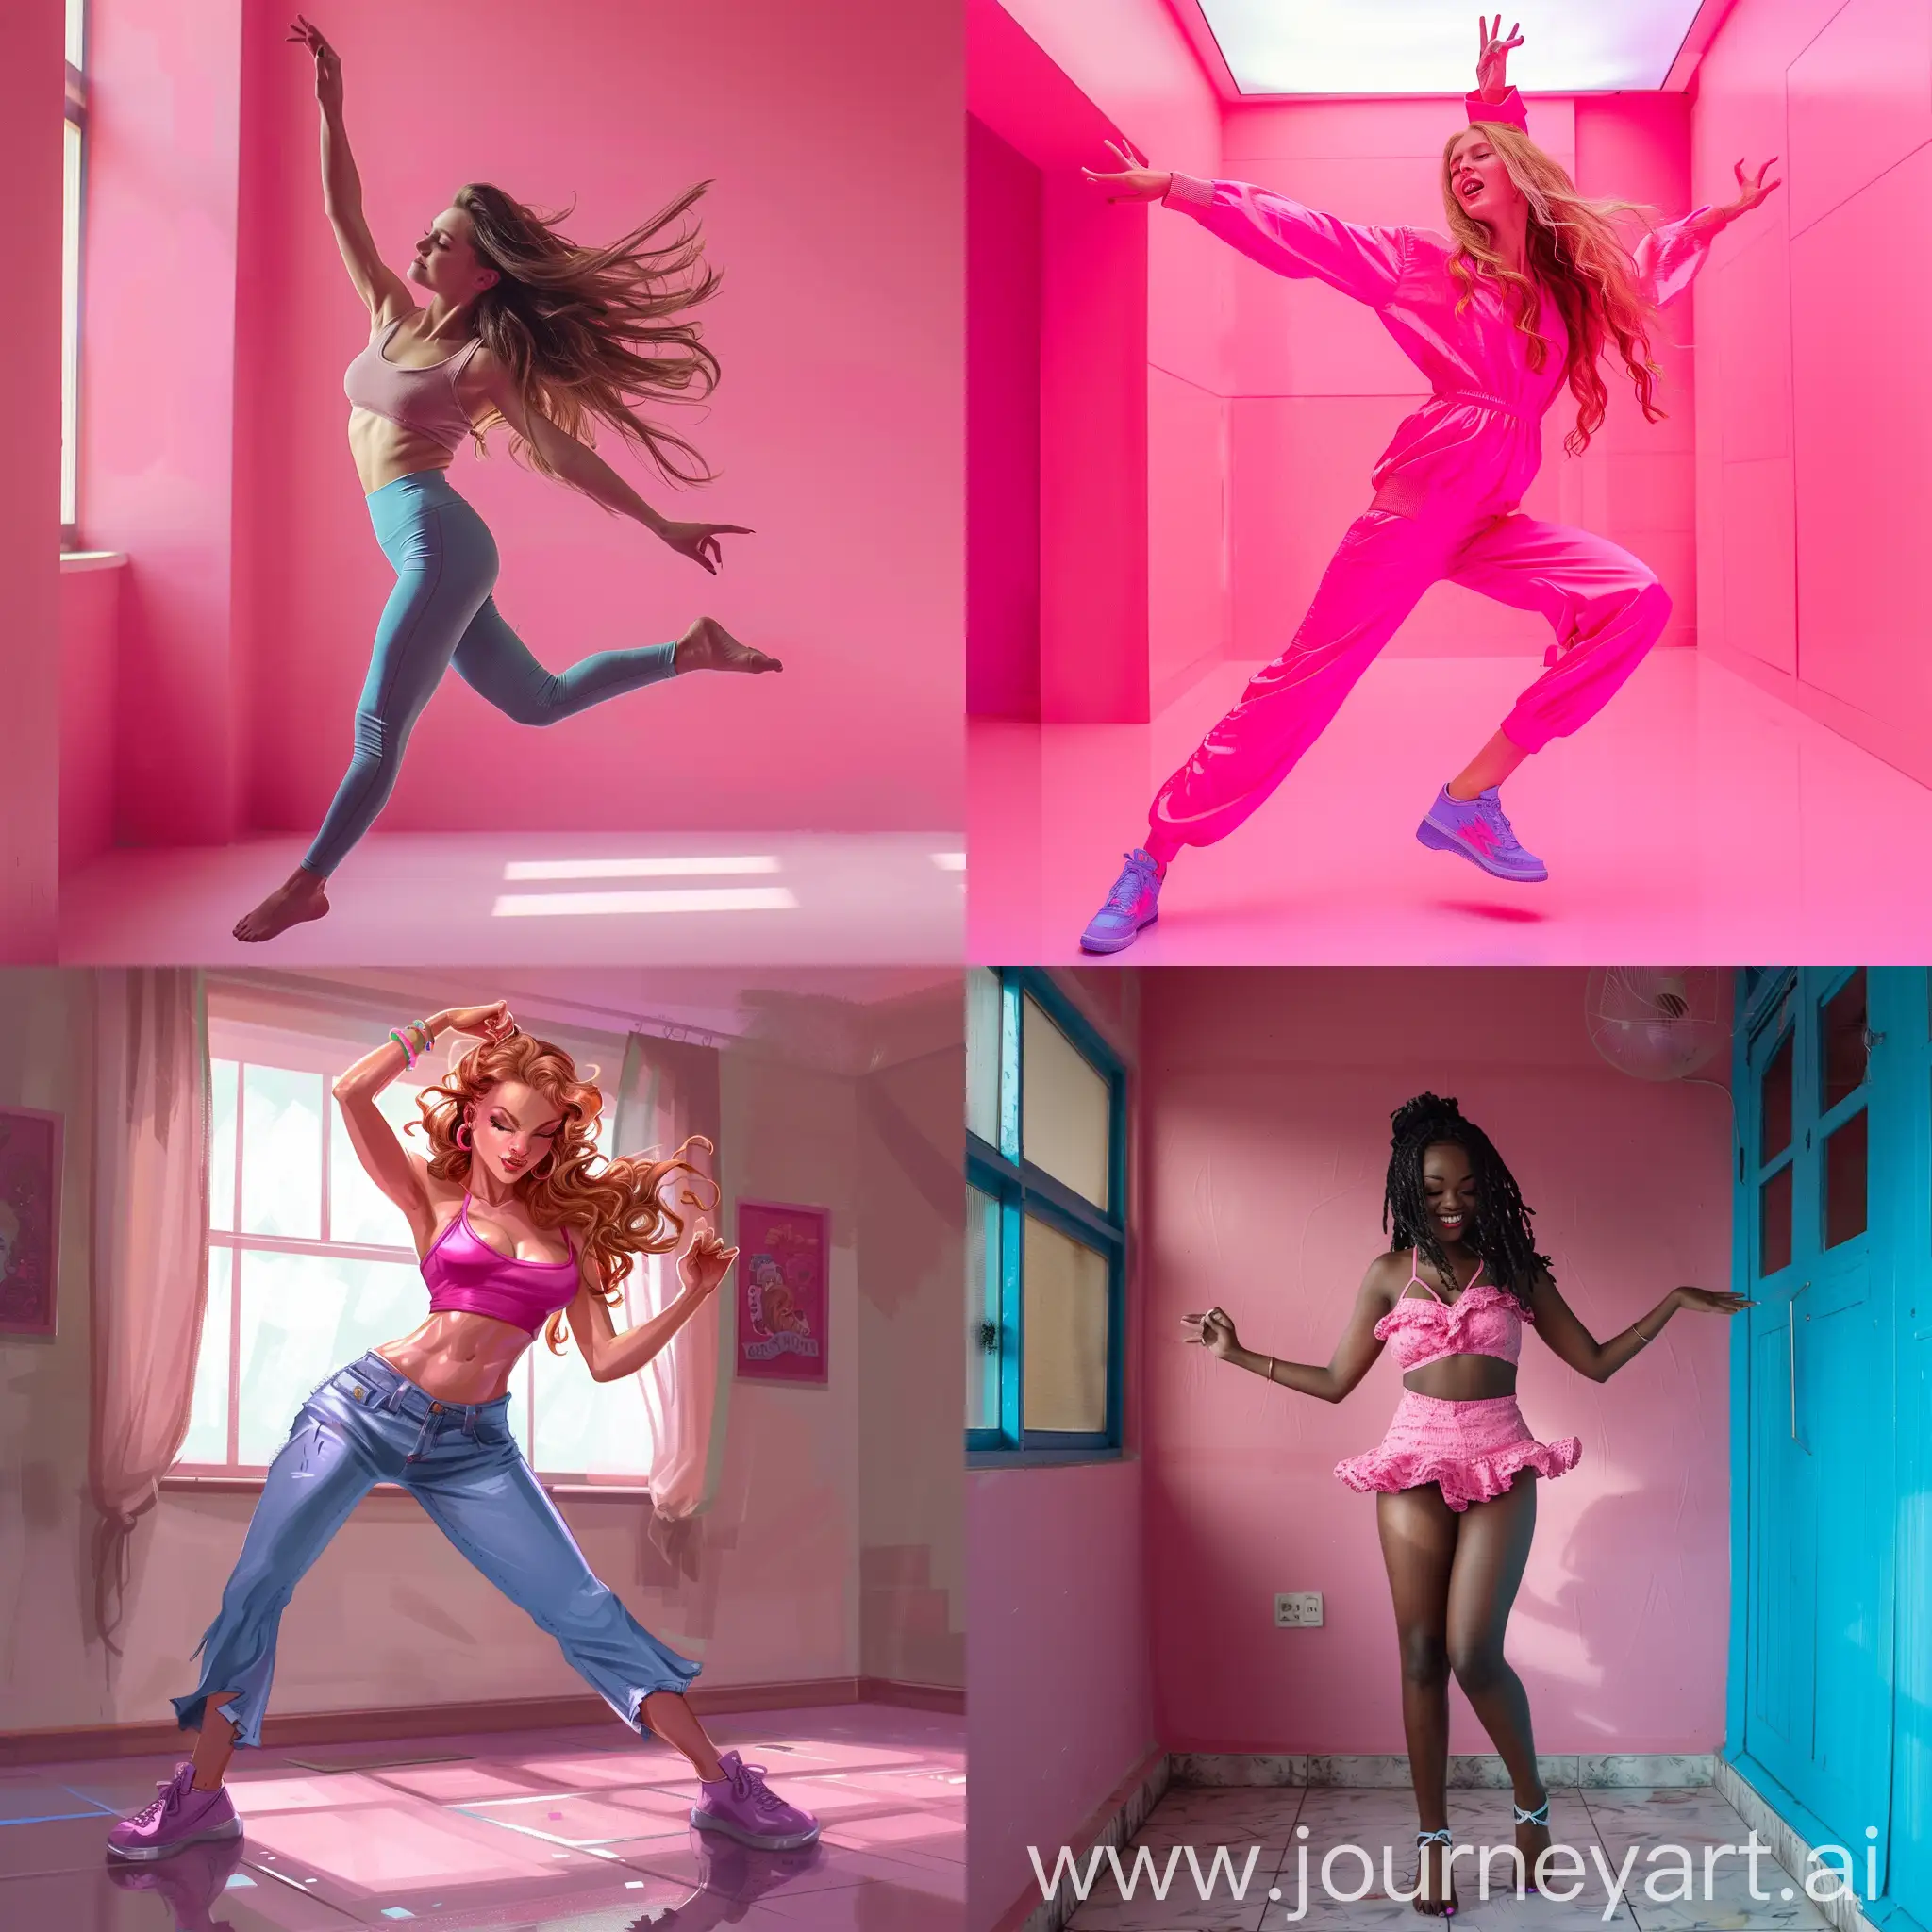 Elegant-Woman-Dancing-in-a-Vibrant-Pink-Room-with-Big-Blue-Eyes